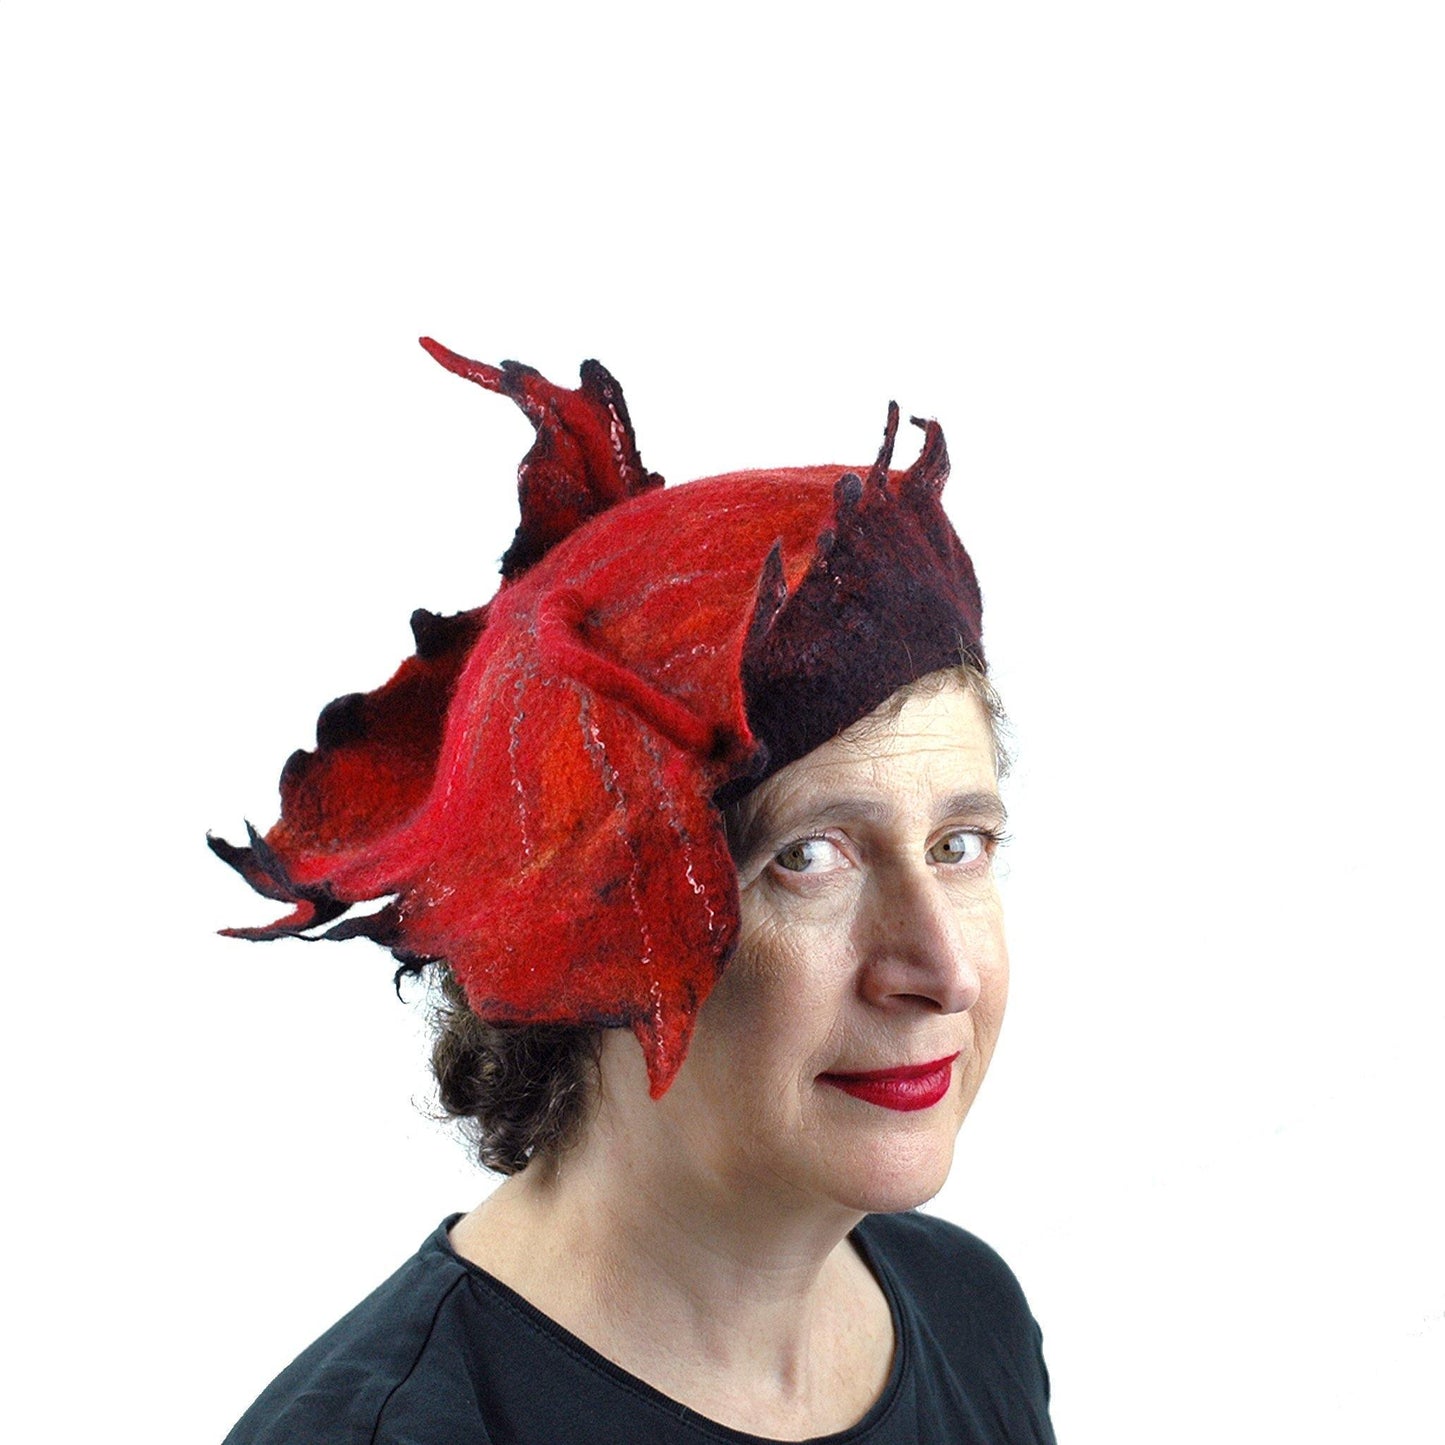 Autumn Inspired Leaf Hat in Red and Black - three quarters view